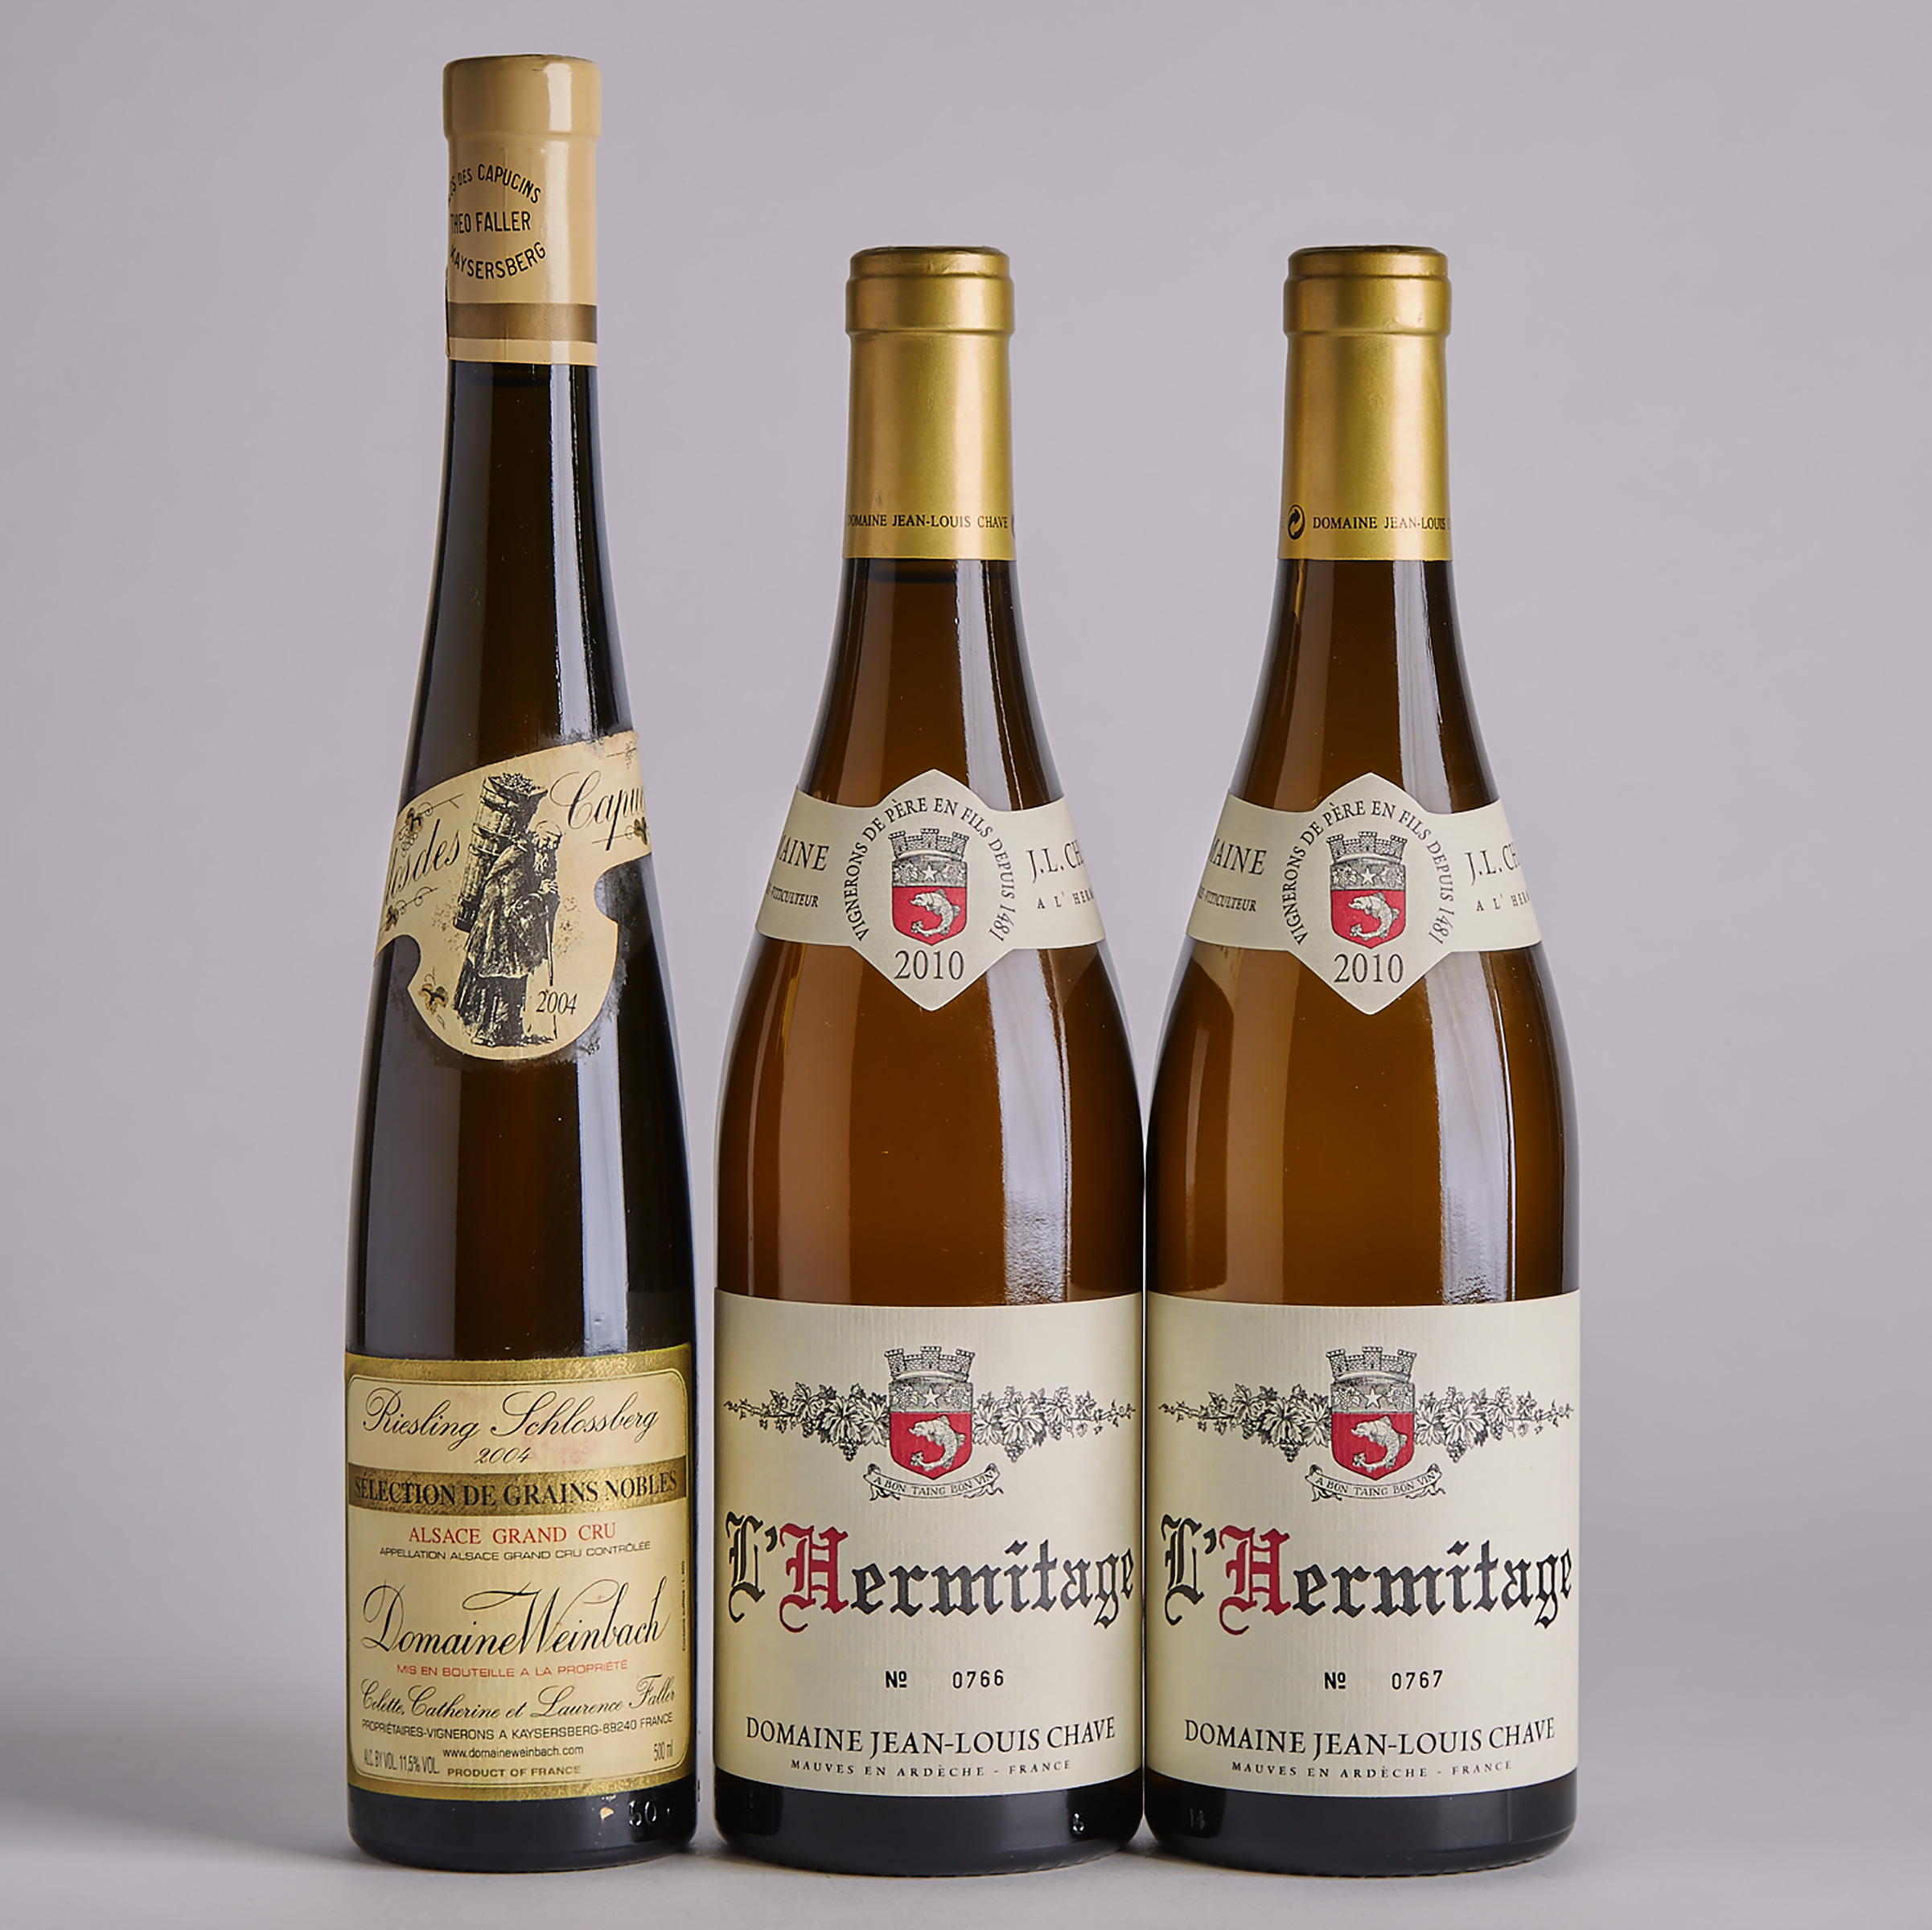 DOMAINE JEAN-LOUIS CHAVE HERMITAGE BLANC 2010 (2) WA 97
DOMAINE WEINBACH RIESLING SCHLOSSBERG SELECTION DE GRAINS NOBLES 2004 (1 HF LTR.) WA 94